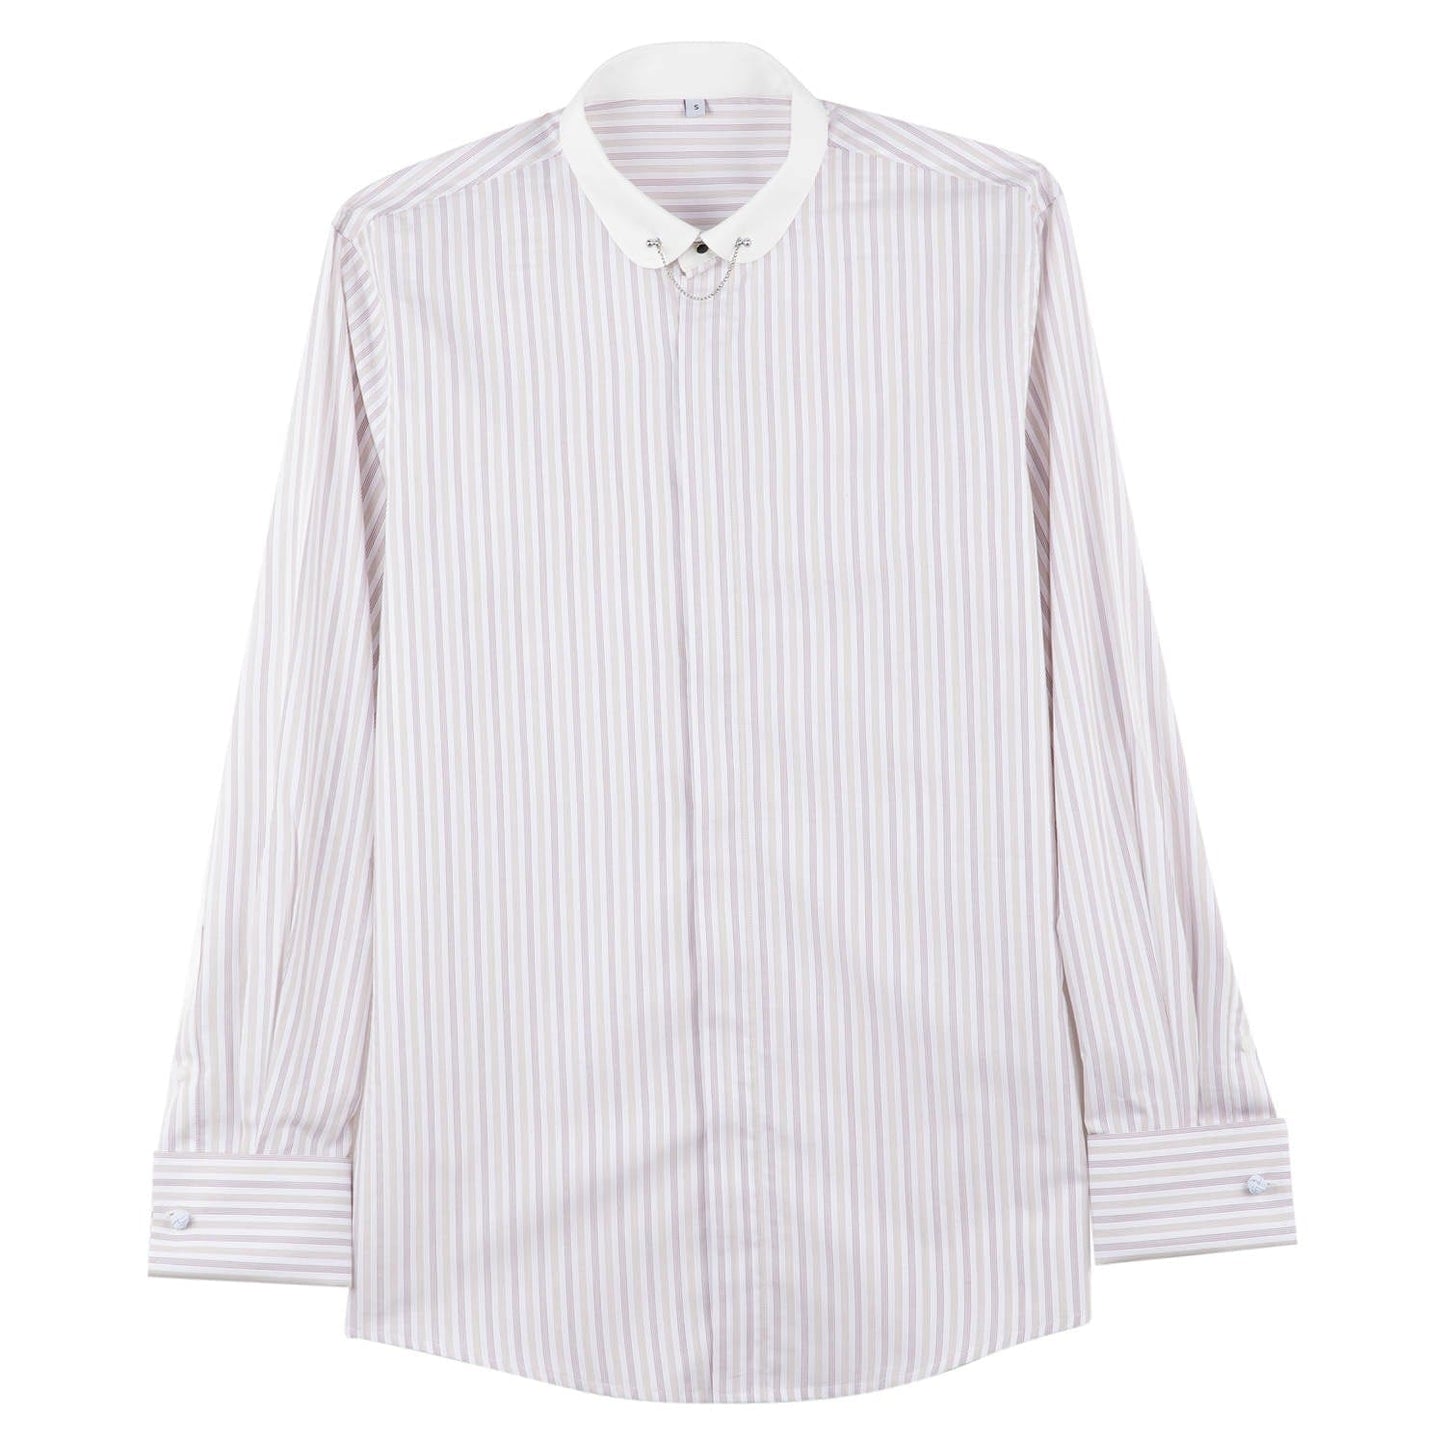 full front view of the beige pinstripe round collar doublecuff shirt showing cufflinks on sleeves